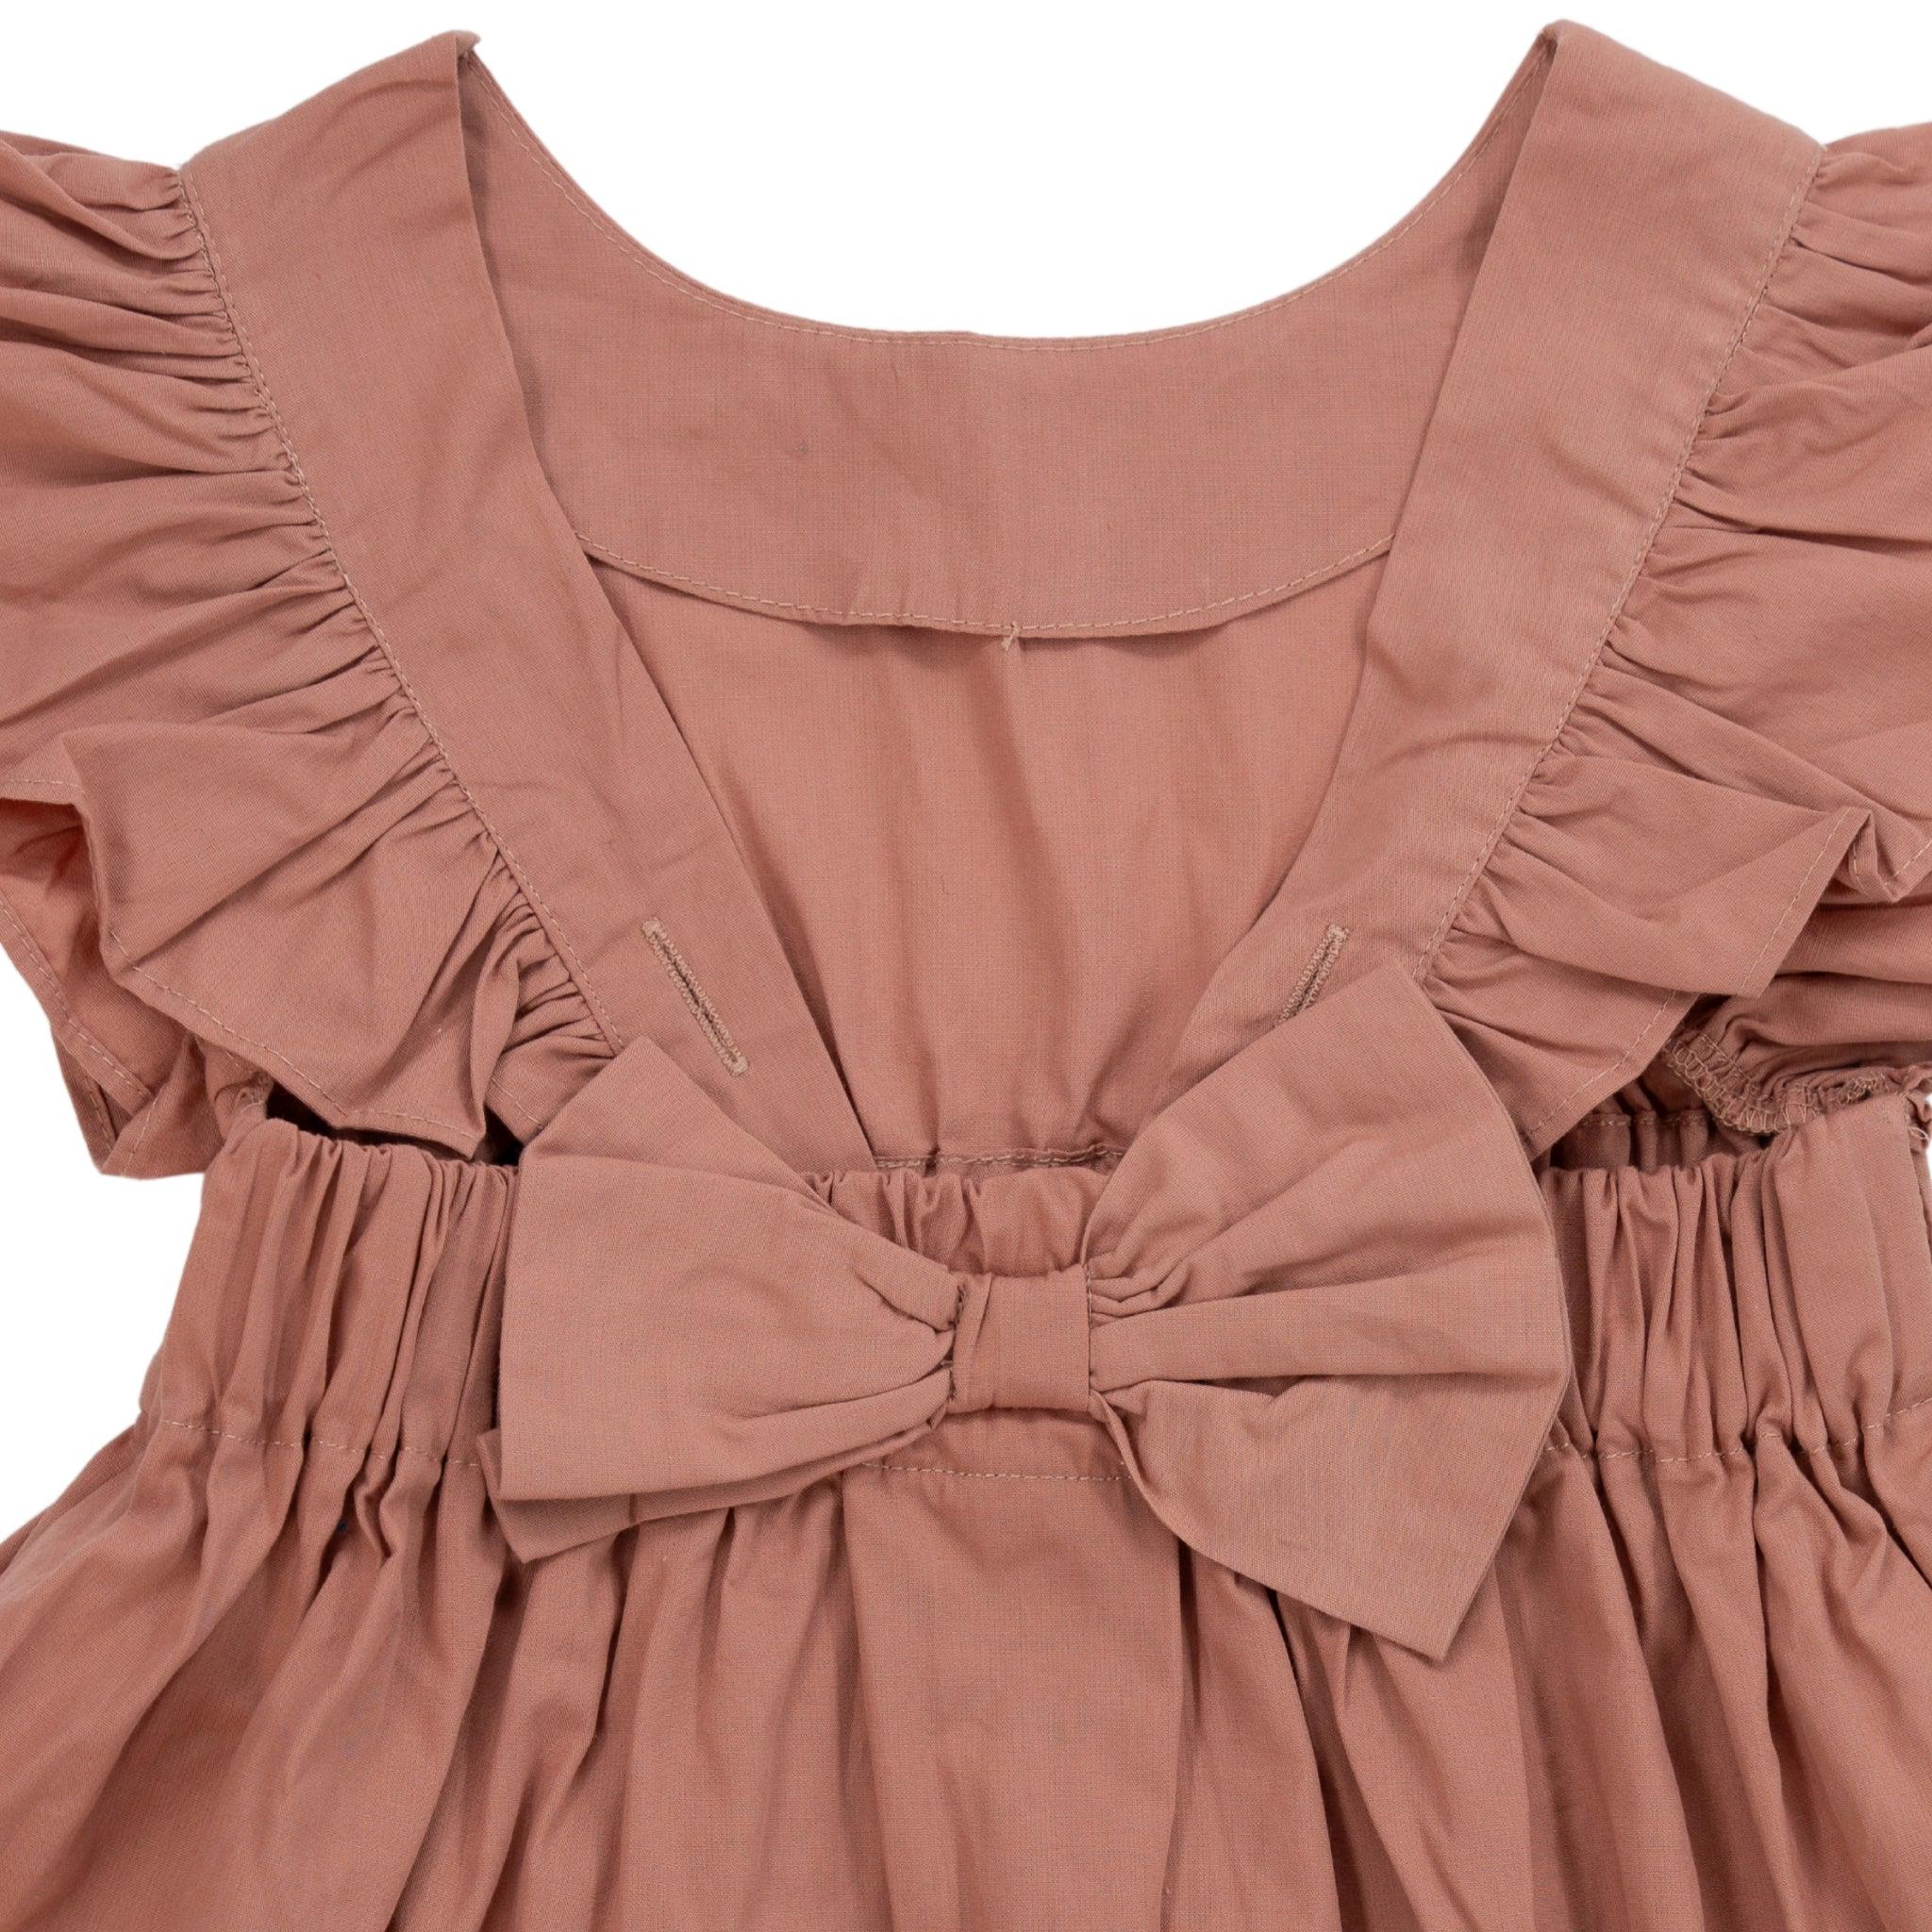 Close-up of a Brick Dust Cotton Floral Dress for Girls by Karee with ruffled sleeves and a bow detail at the waist against a white background.